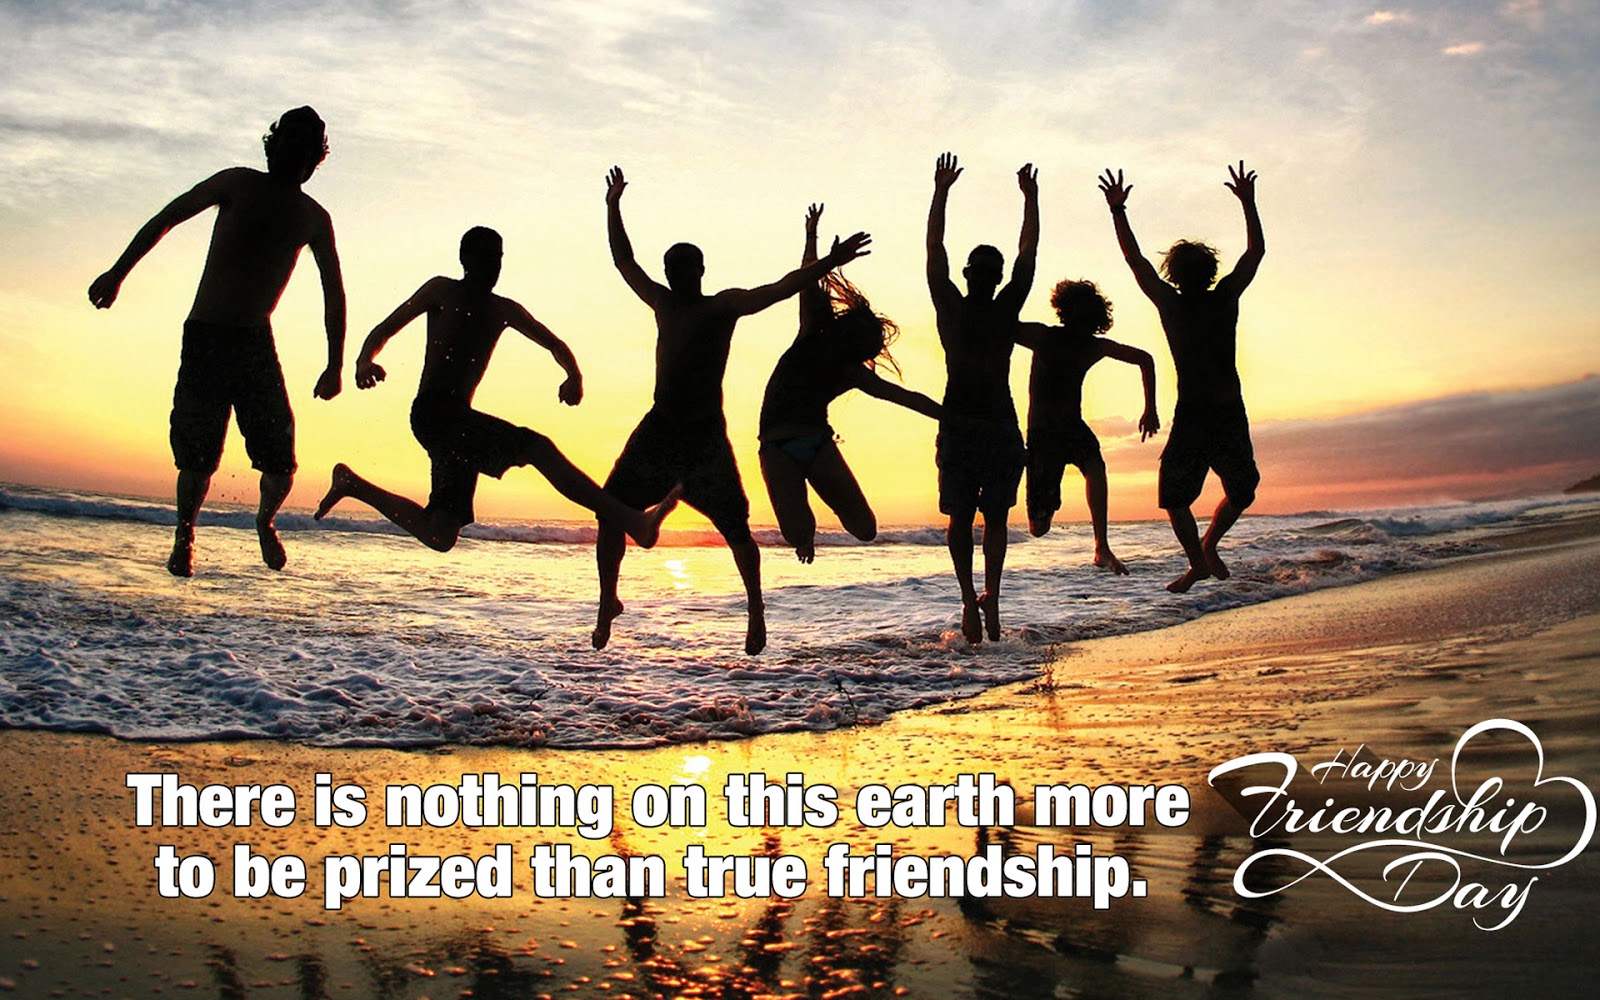 nice wallpaper of friendship, people on beach, people in nature, friendship, facial expression, fun